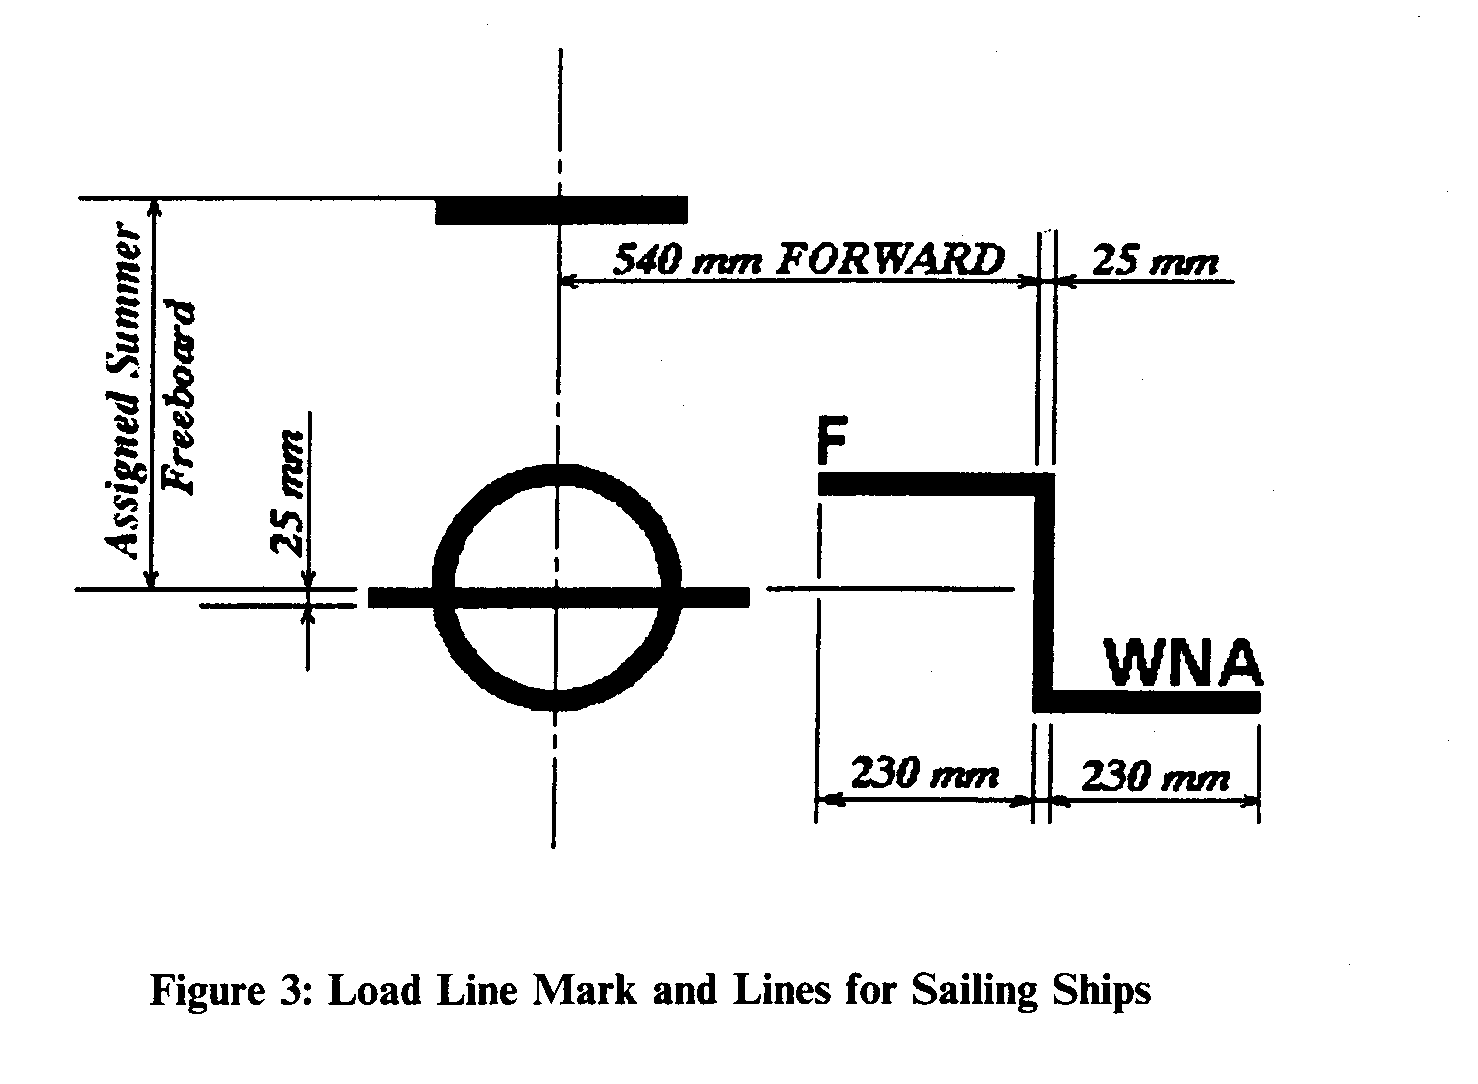 Figure 3 - Load Line Mark and Lines for Sailing Ships